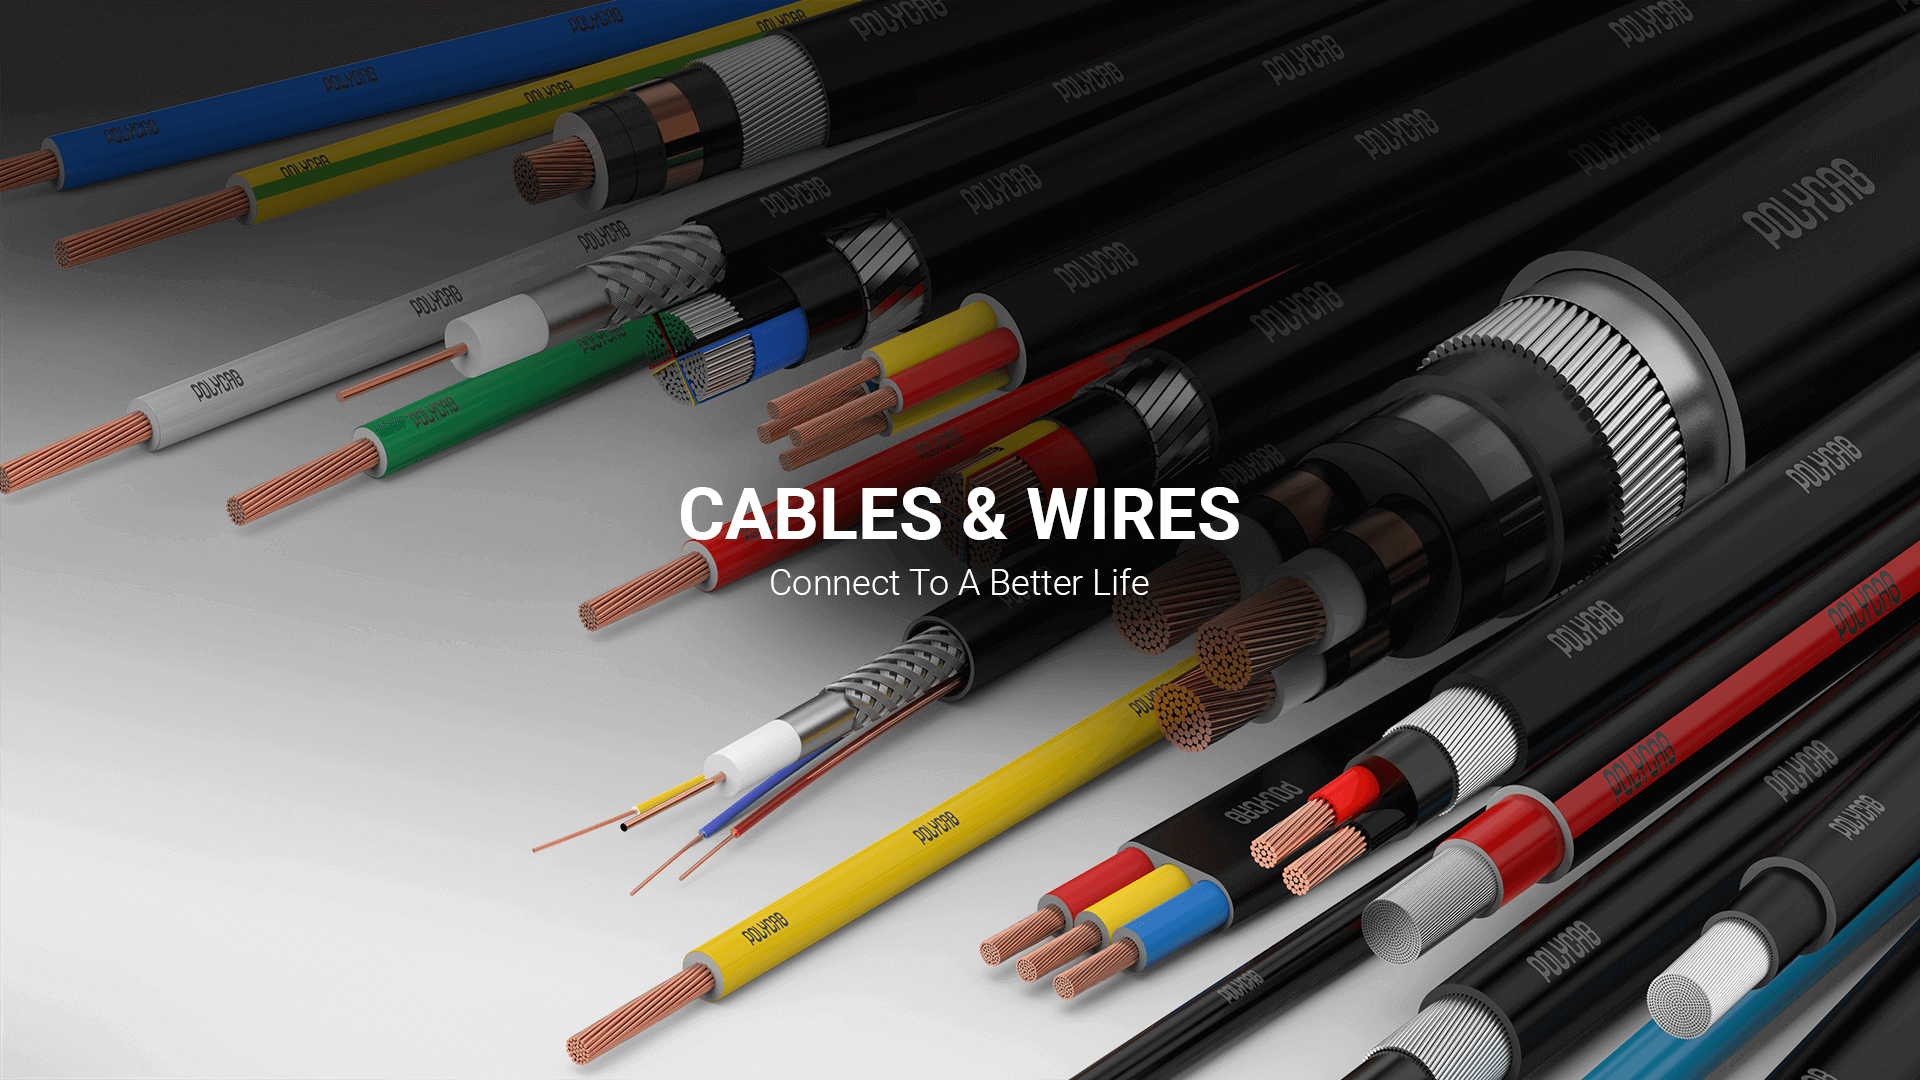 Polycab Cables Banner Image